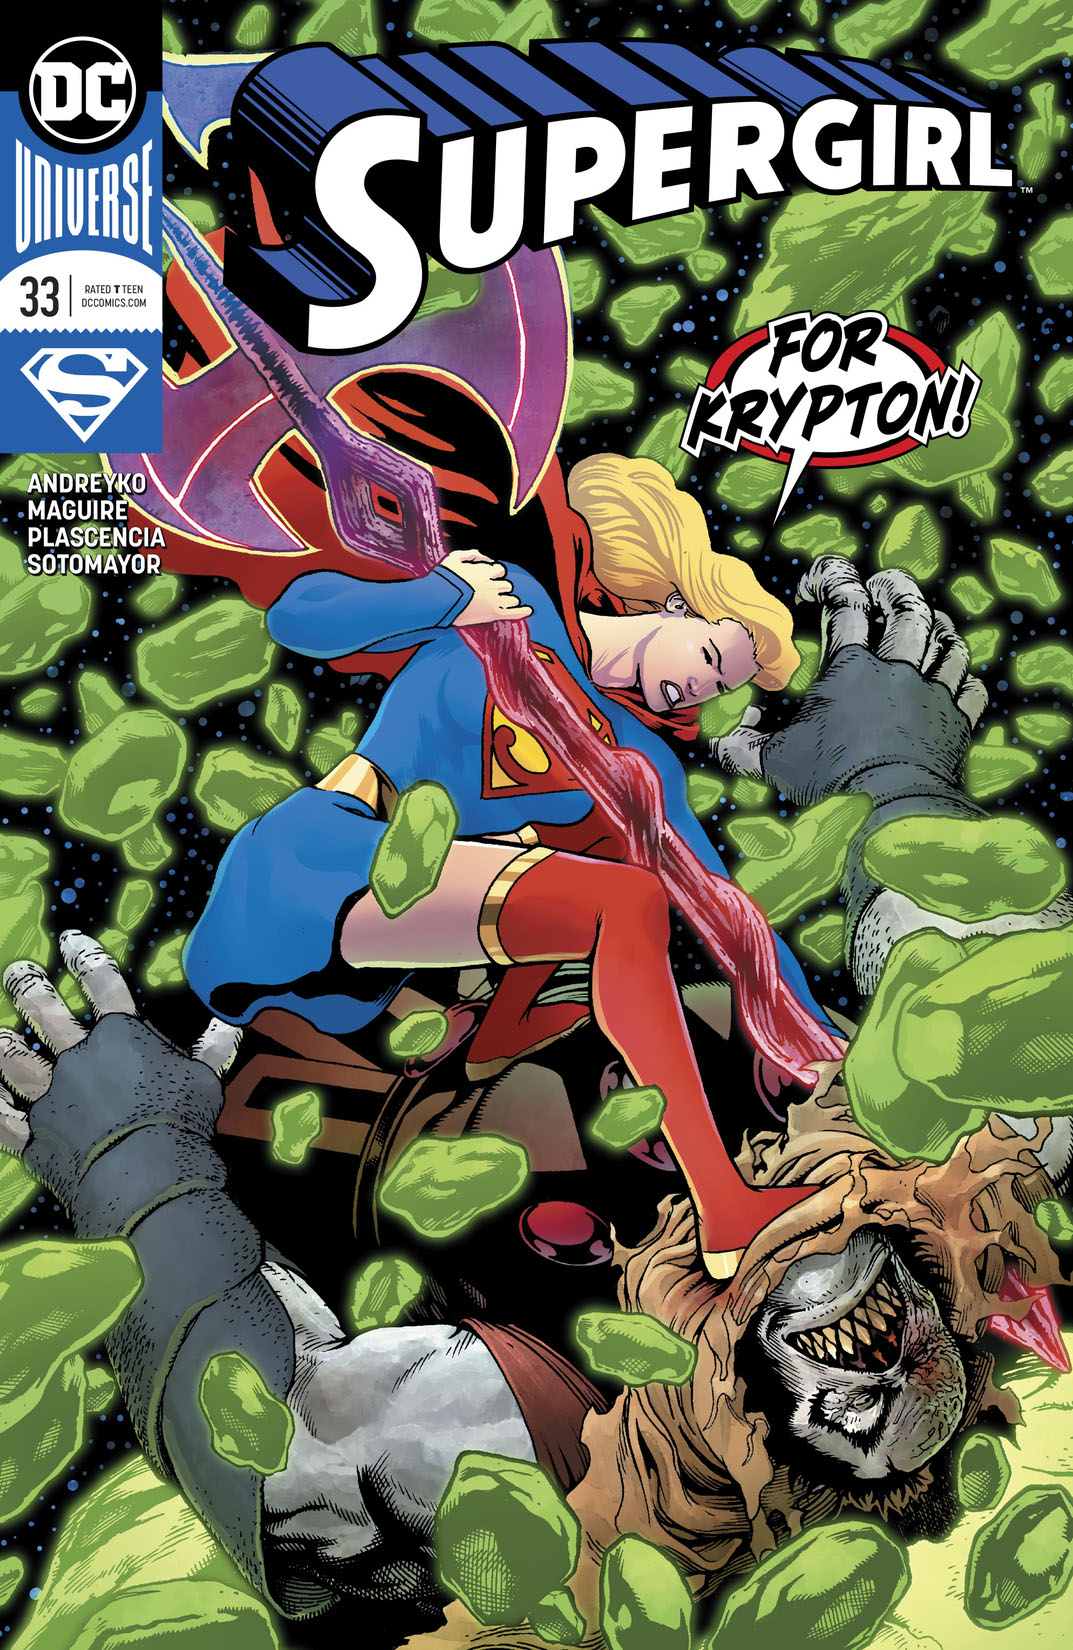 Supergirl (2016-) #33 preview images